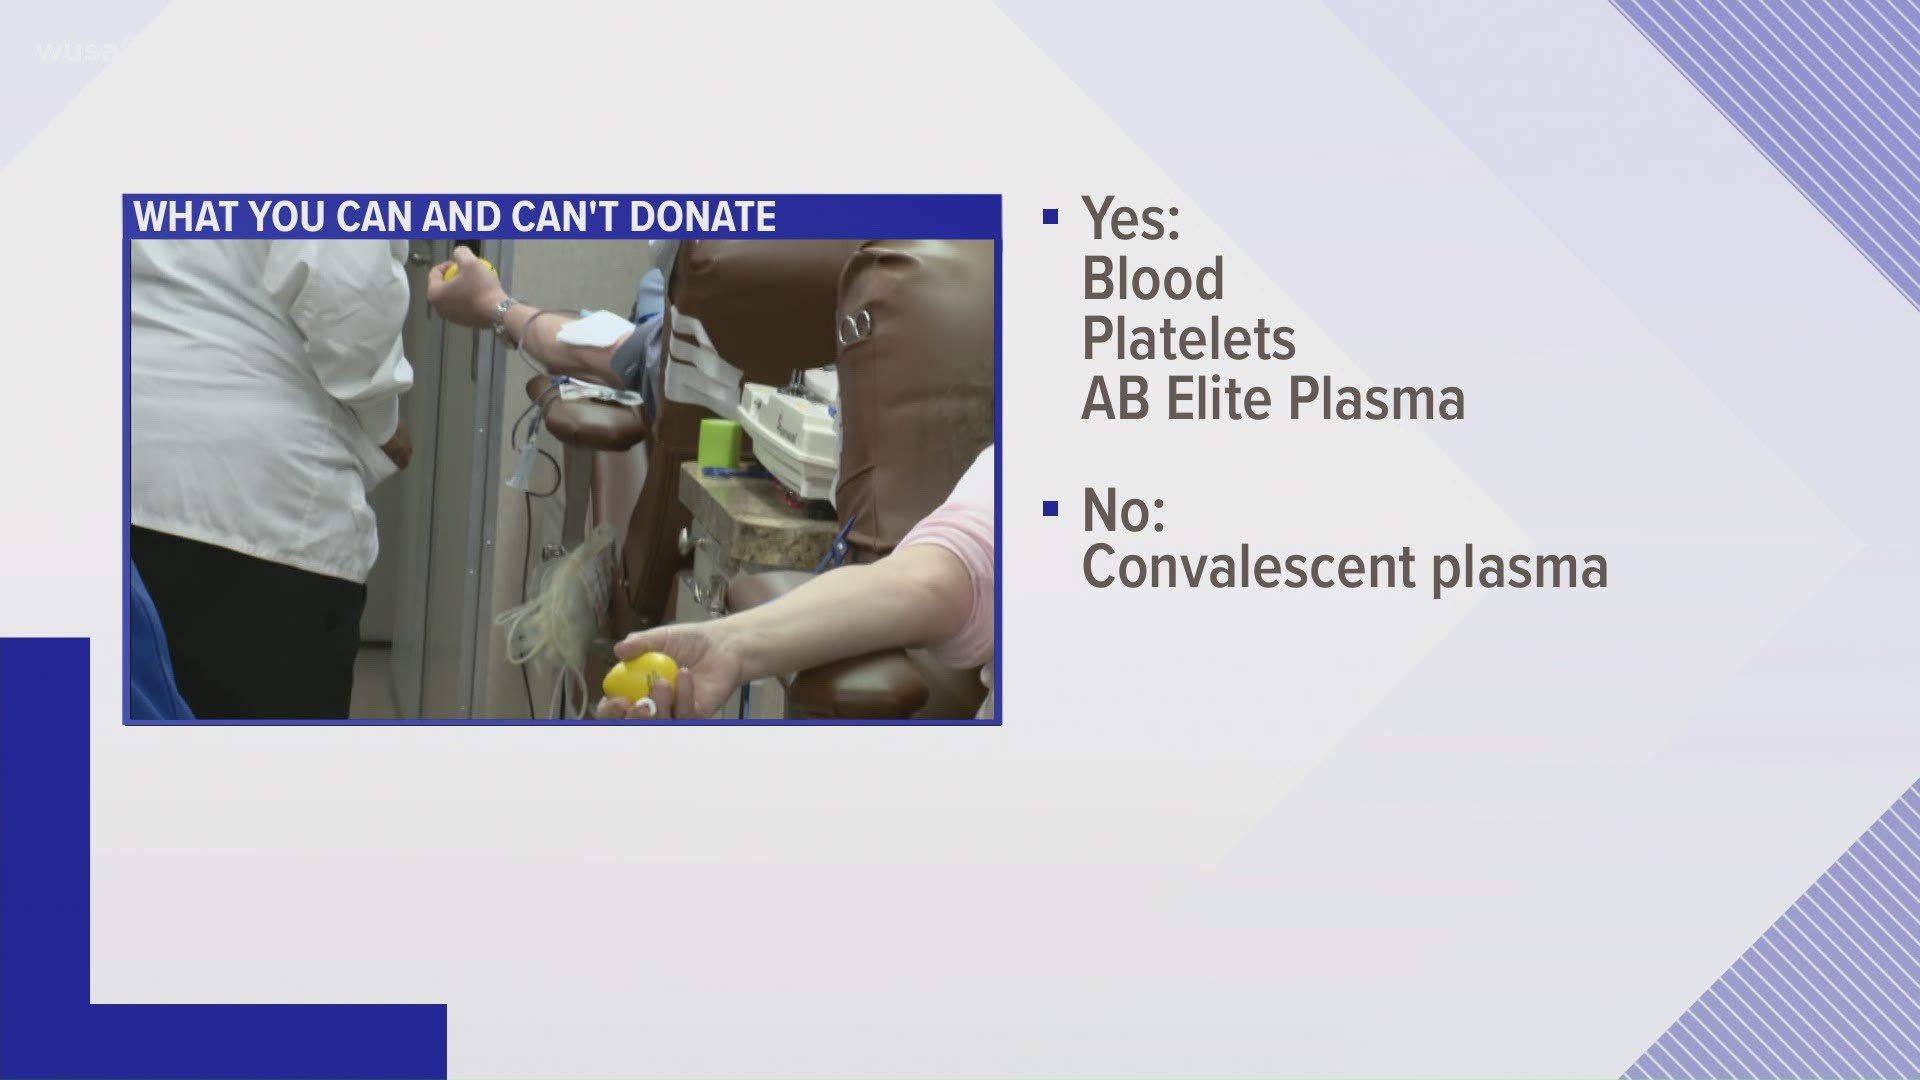 According to The Red Cross, you can still donate blood, platelets and A-B Elite Plasma